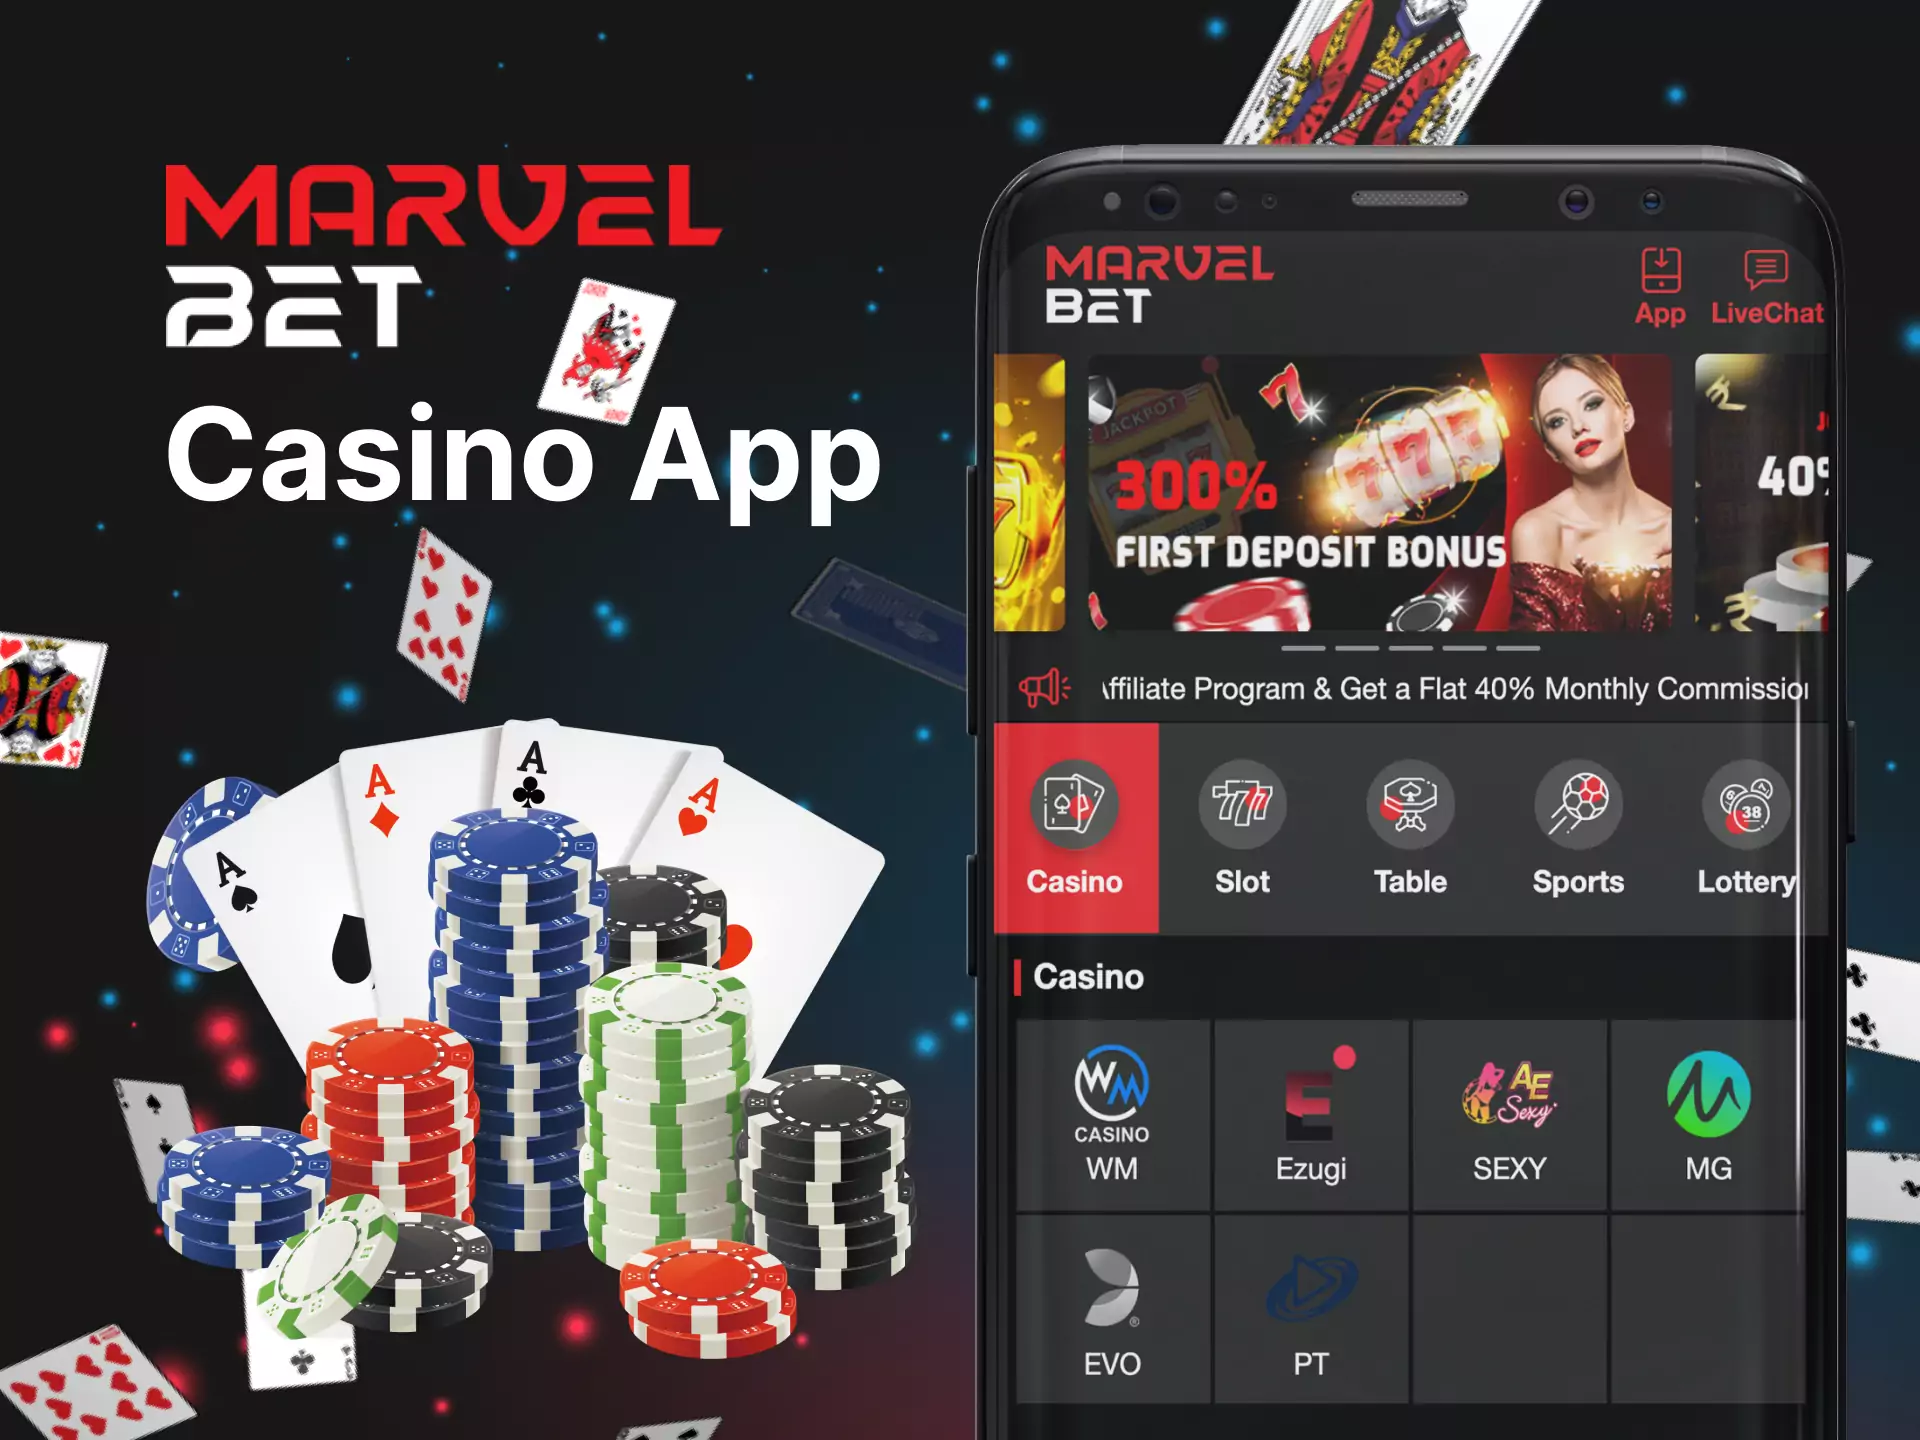 Besides the sportsbook, there is also an online casino in the Marvelbet app.